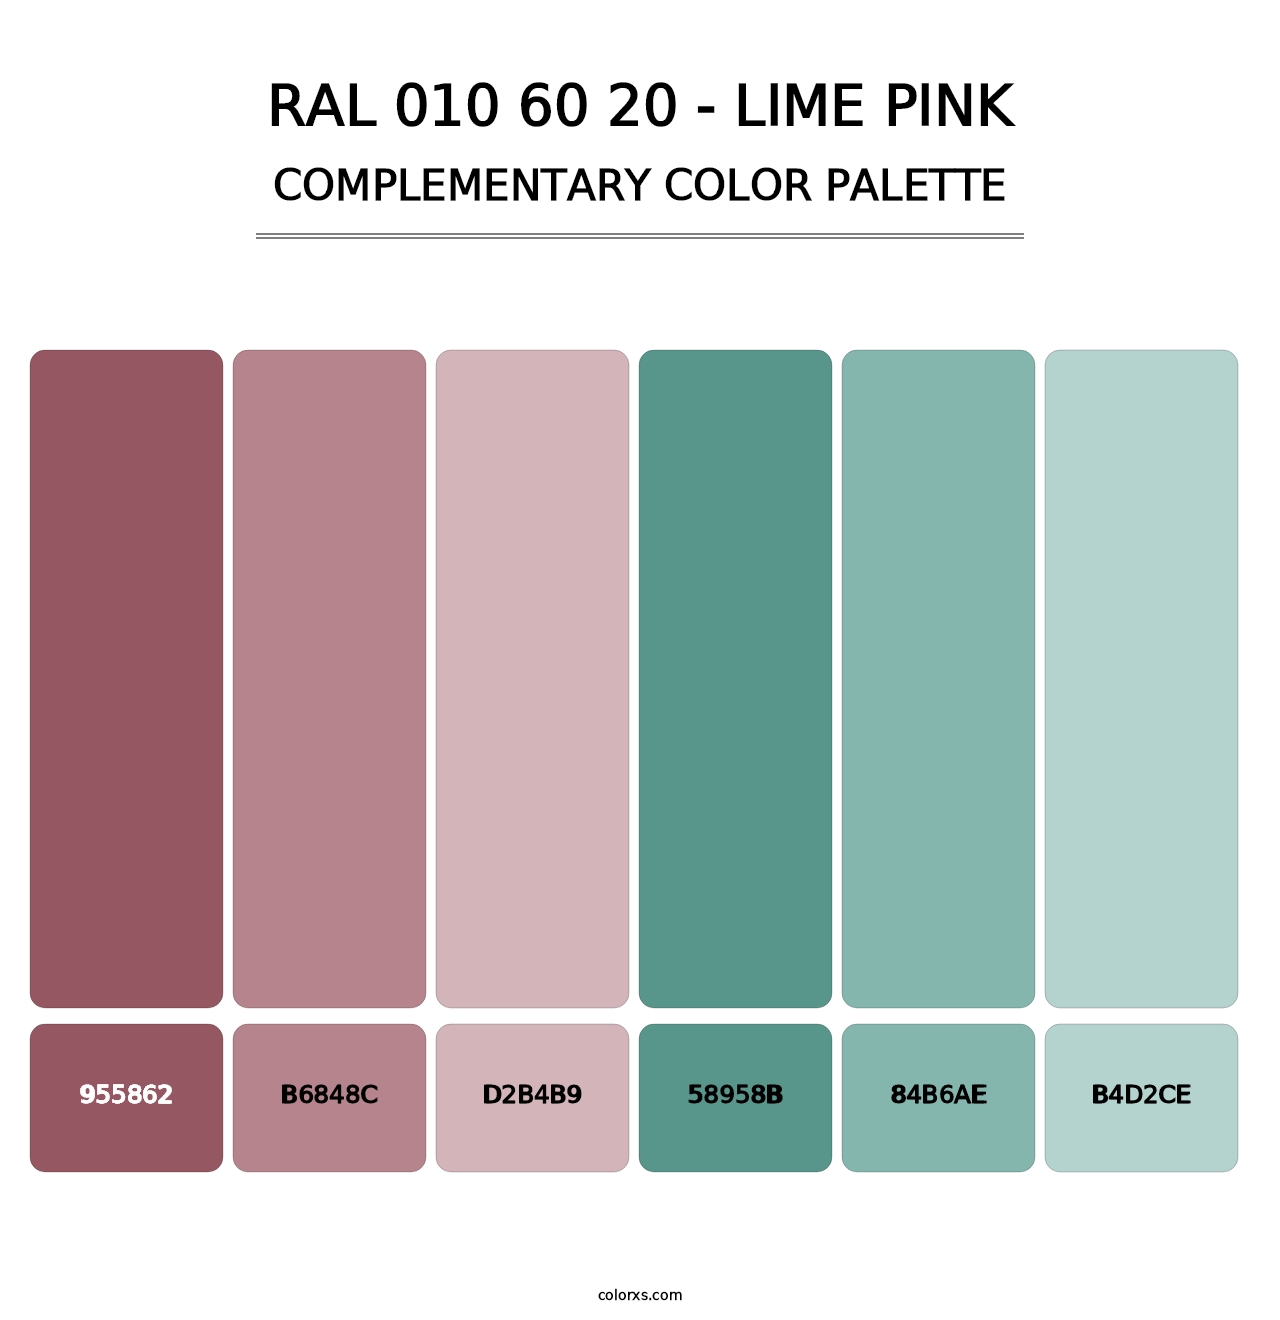 RAL 010 60 20 - Lime Pink - Complementary Color Palette